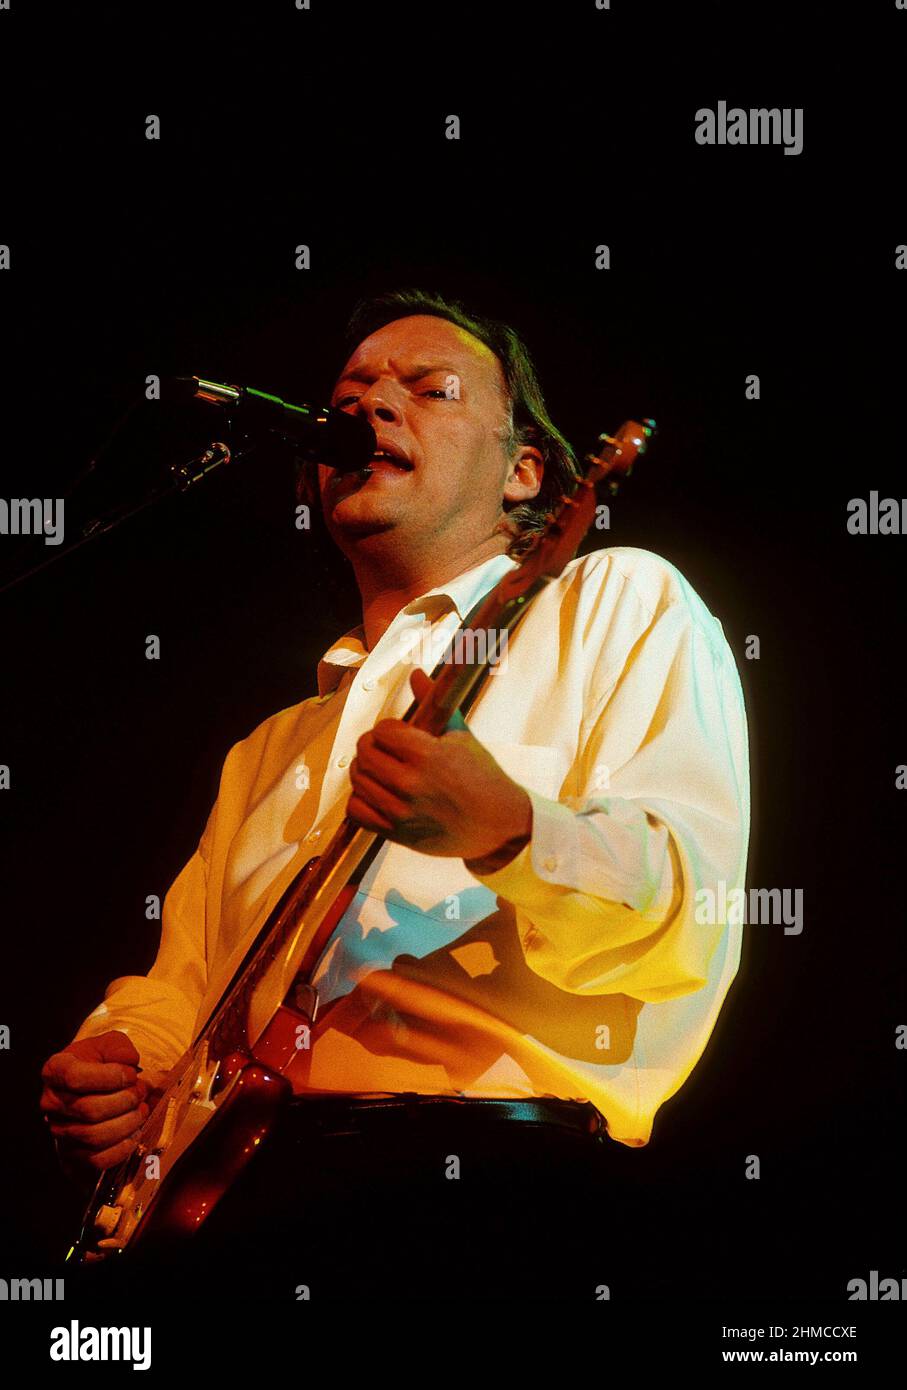 LOS ANGELES, CA - APRIL 12: David Gilmour of Pink Floyd  in concert on April 23, 1988 in Los Angeles, California. Credit: Jeffrey Mayer/ Rock Negatives / MediaPunch Stock Photo